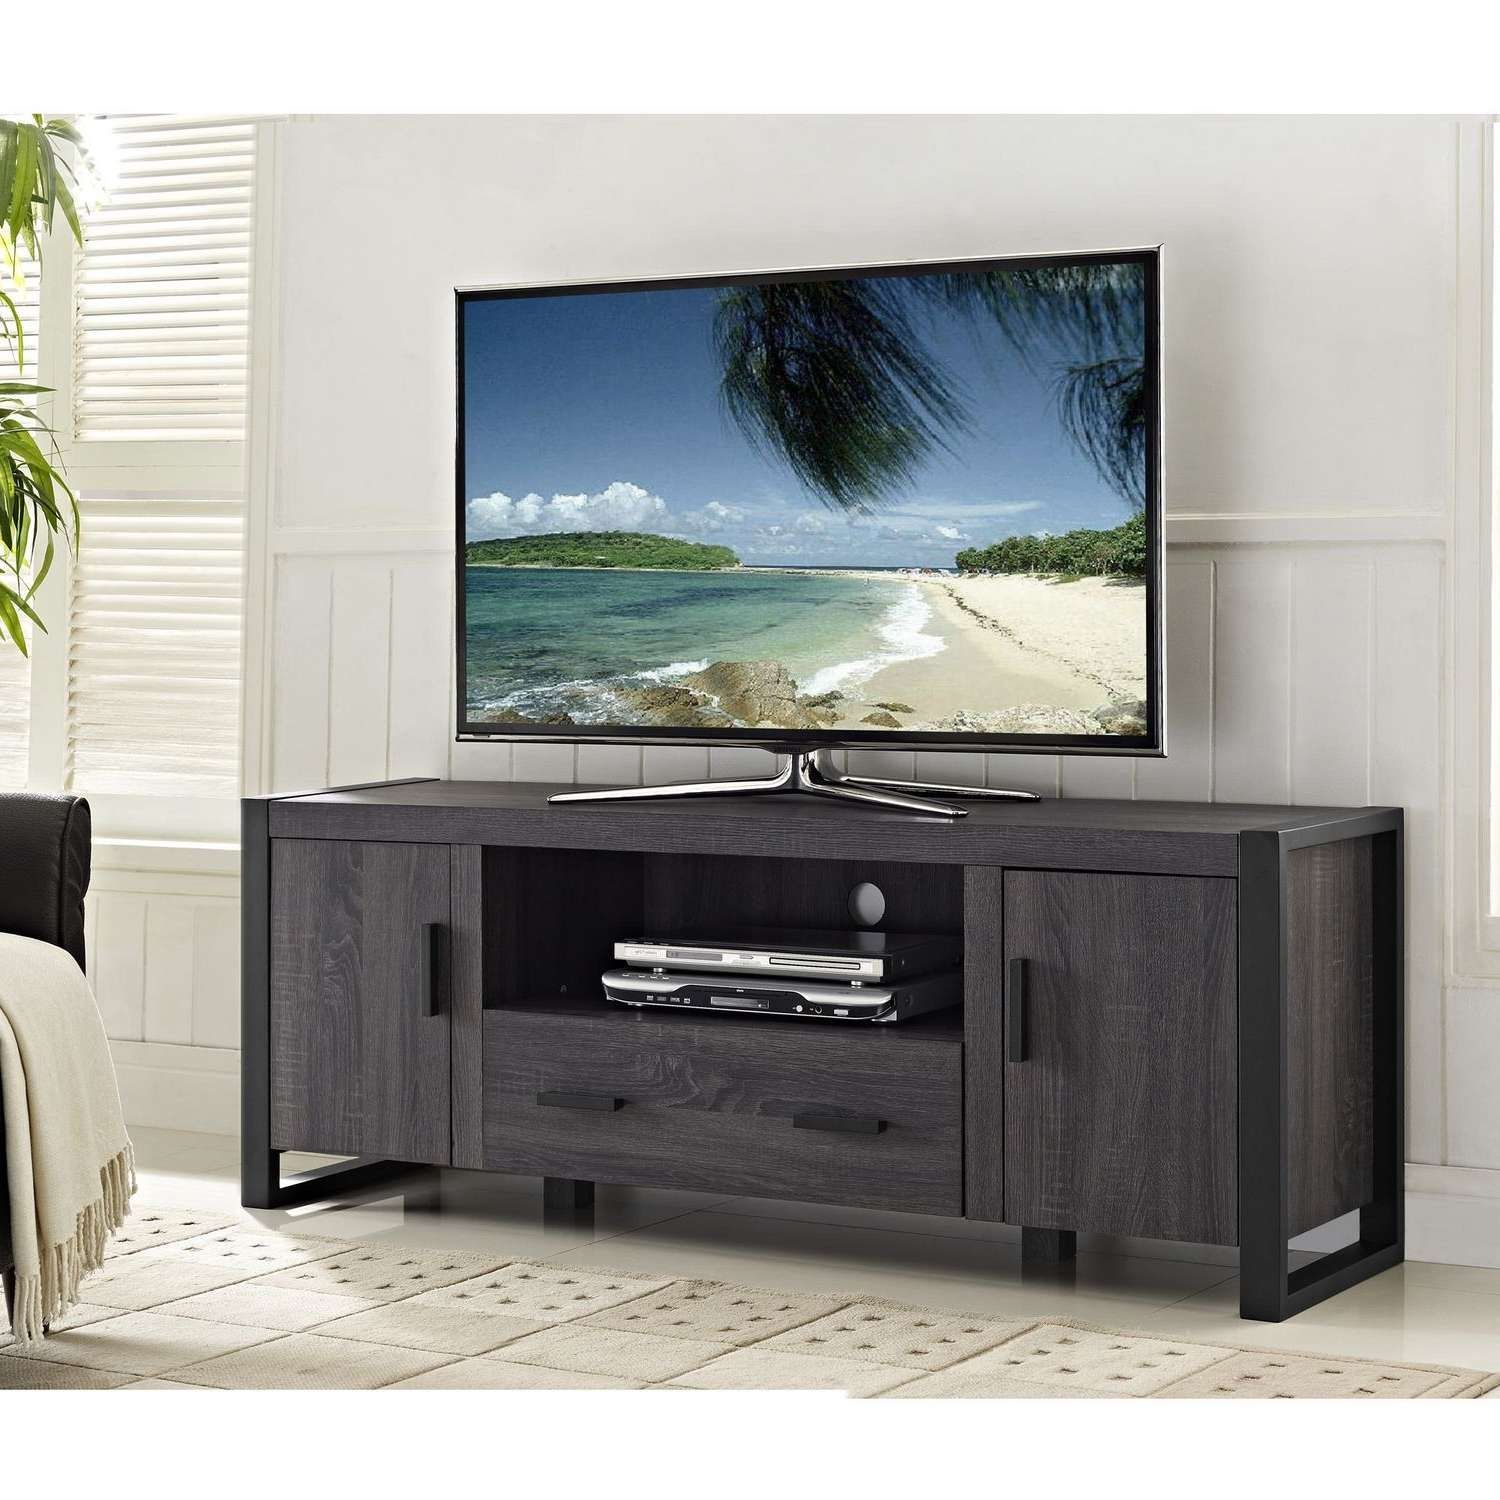 We Furniture 60" Grey Wood Tv Stand Console | Walmart Canada With Regard To Grey Wood Tv Stands (View 1 of 15)